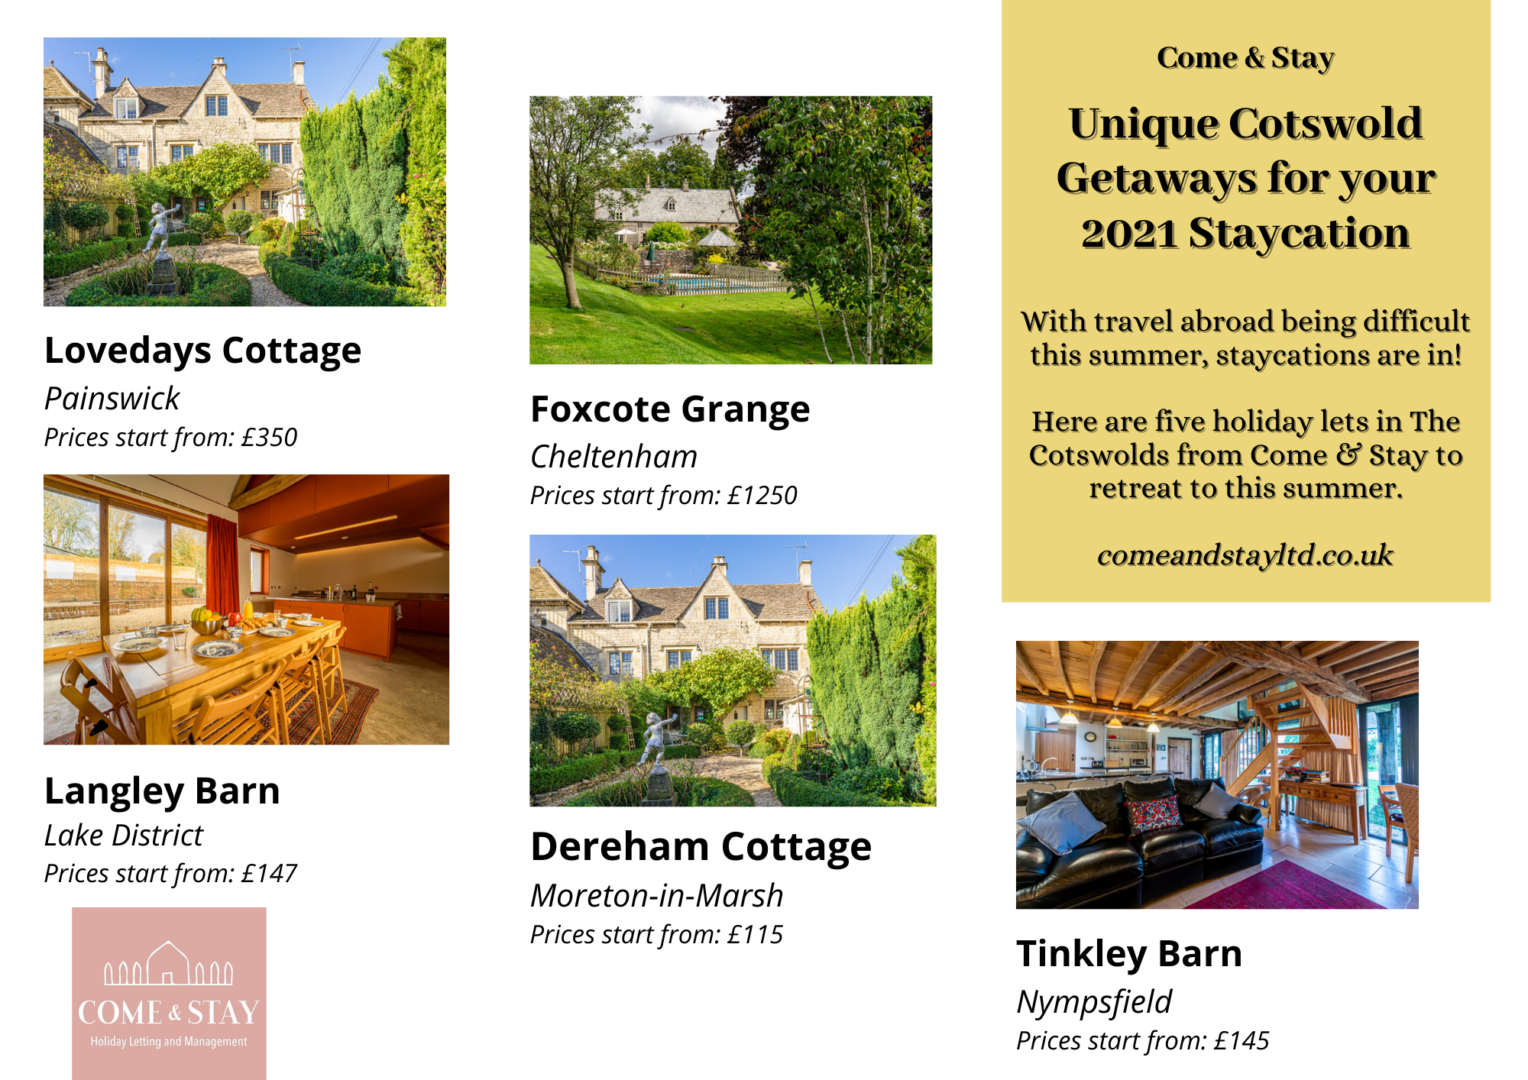 Three Ultimate Cotswold Getaways for your Summer Staycation